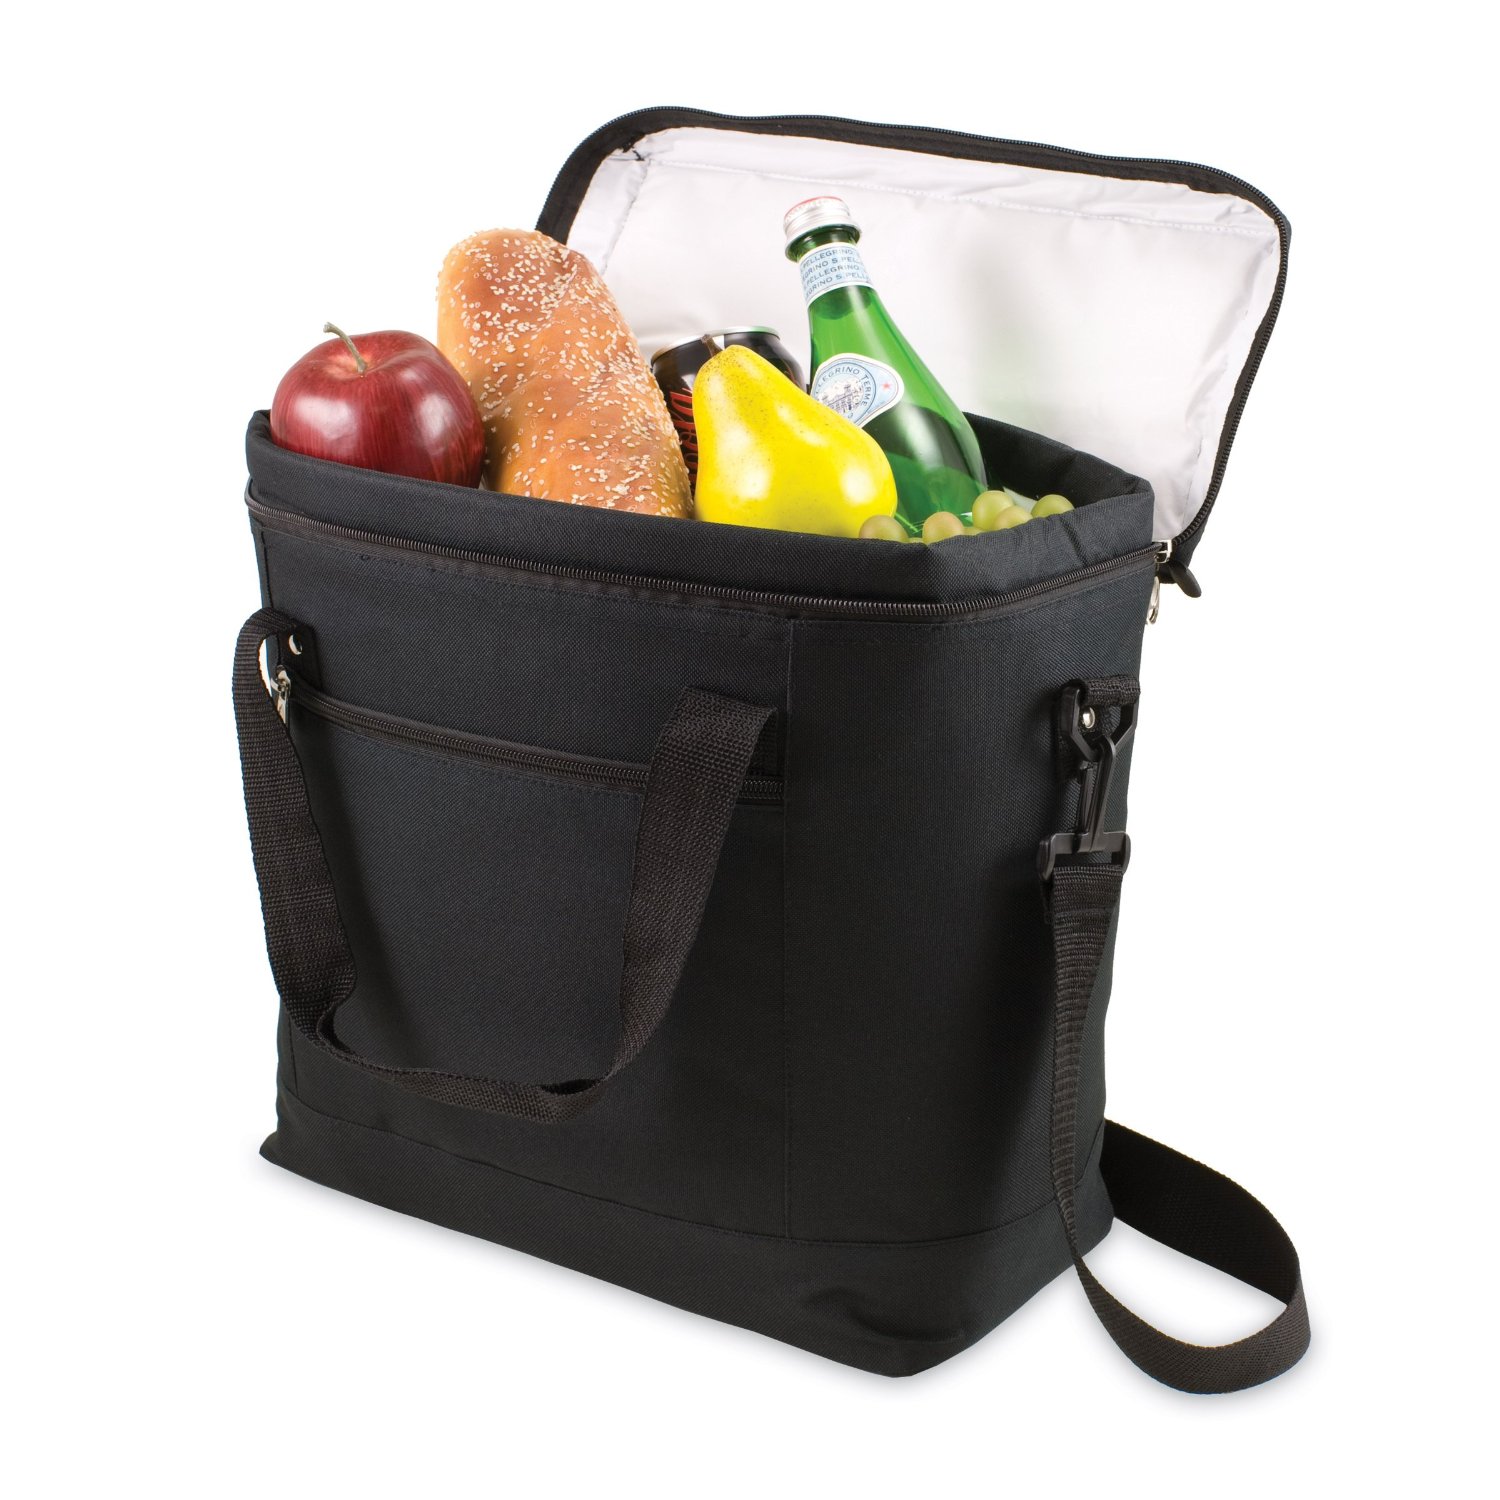 5 Best Picnic Cooler Complete your picnic experience Tool Box